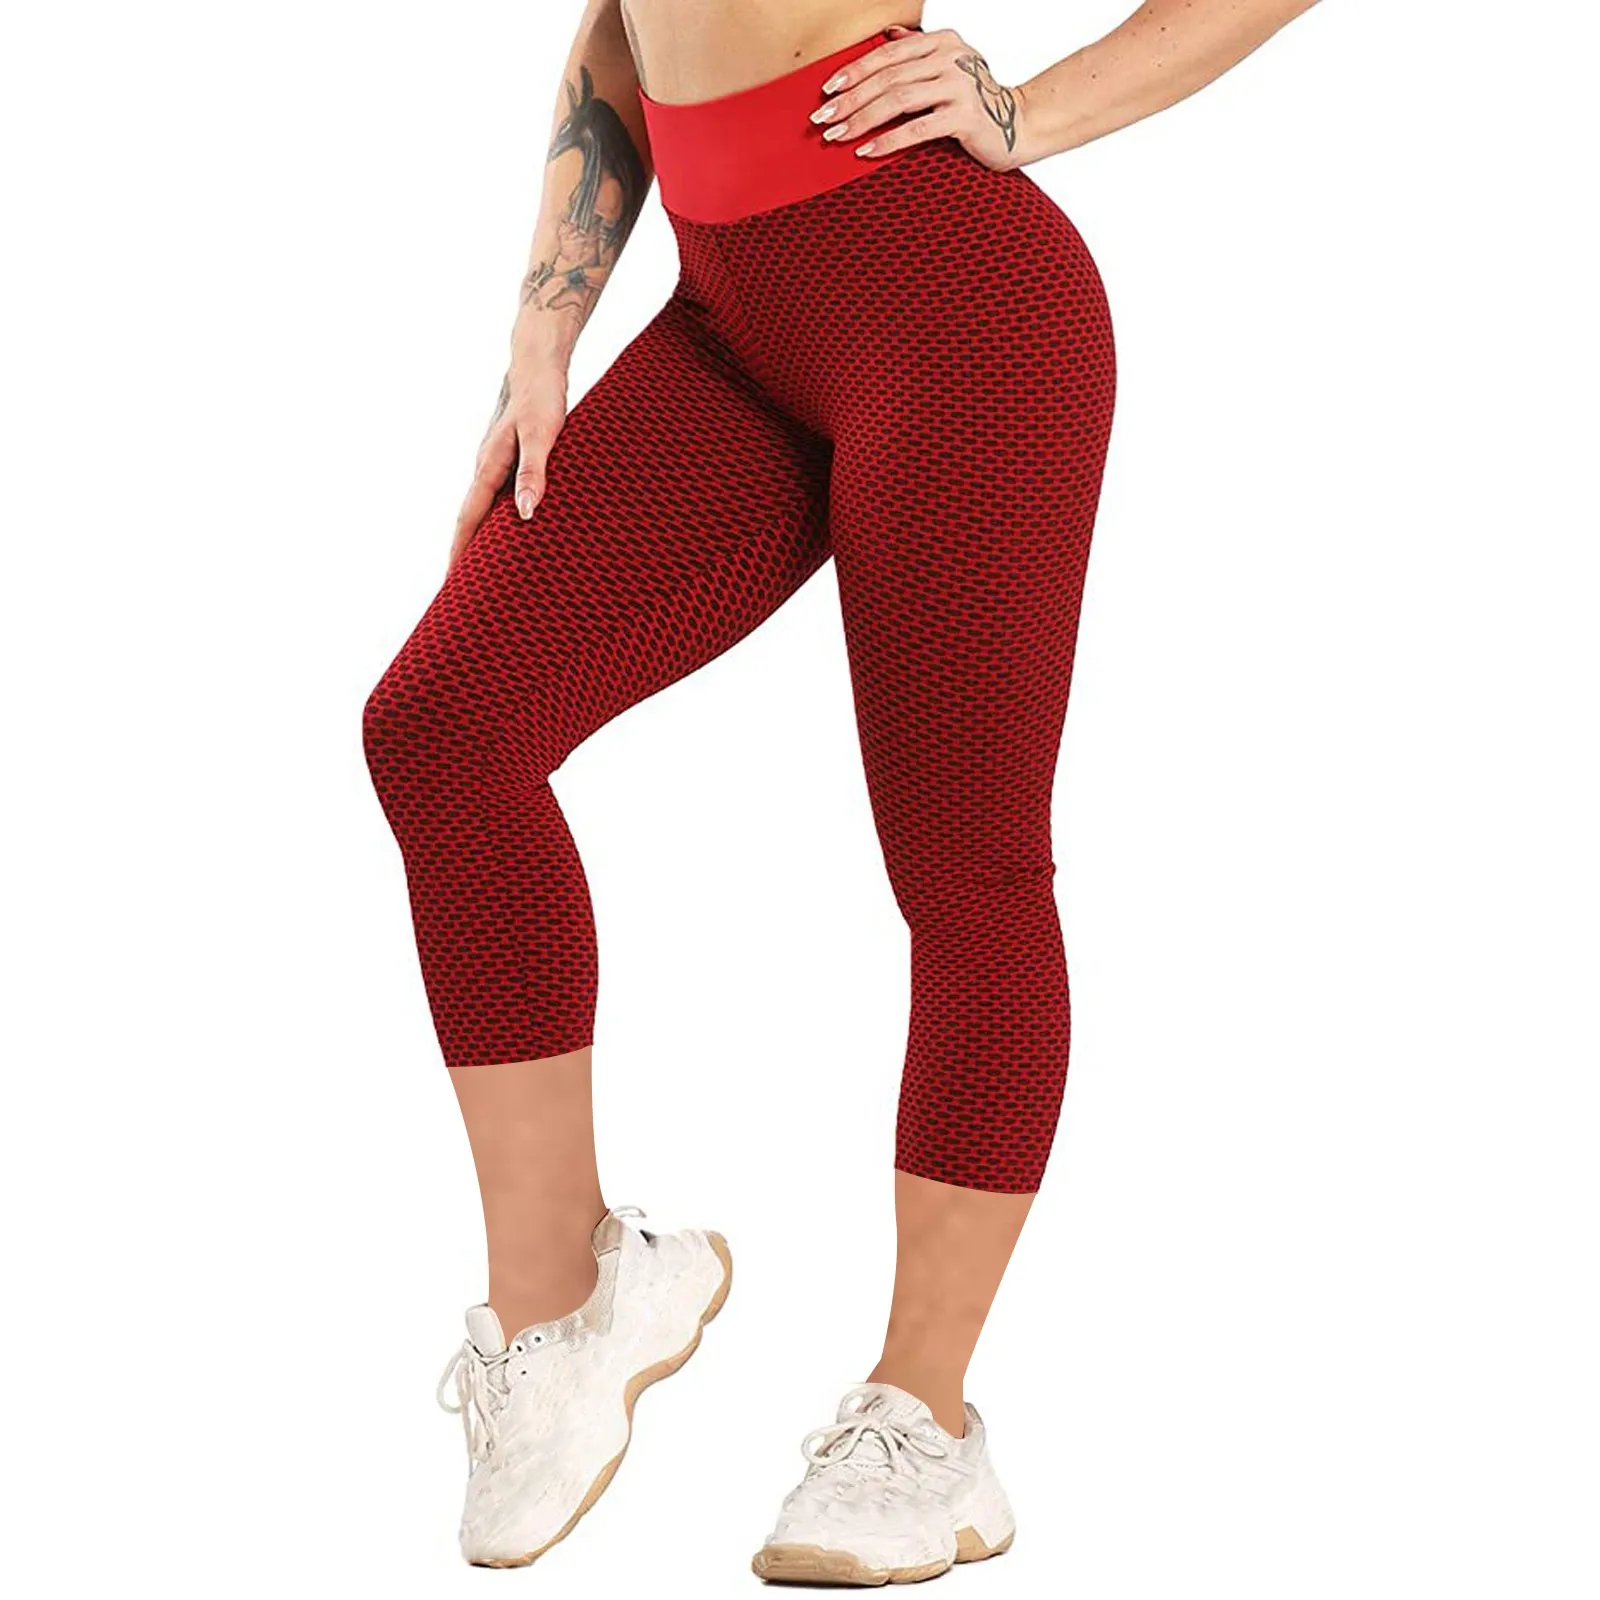 

Womens Running Clothing Ladies Stretch Yoga Leggings Fitness Running Gym Cropped Trousers Active Pants hardloop kleding dames E1